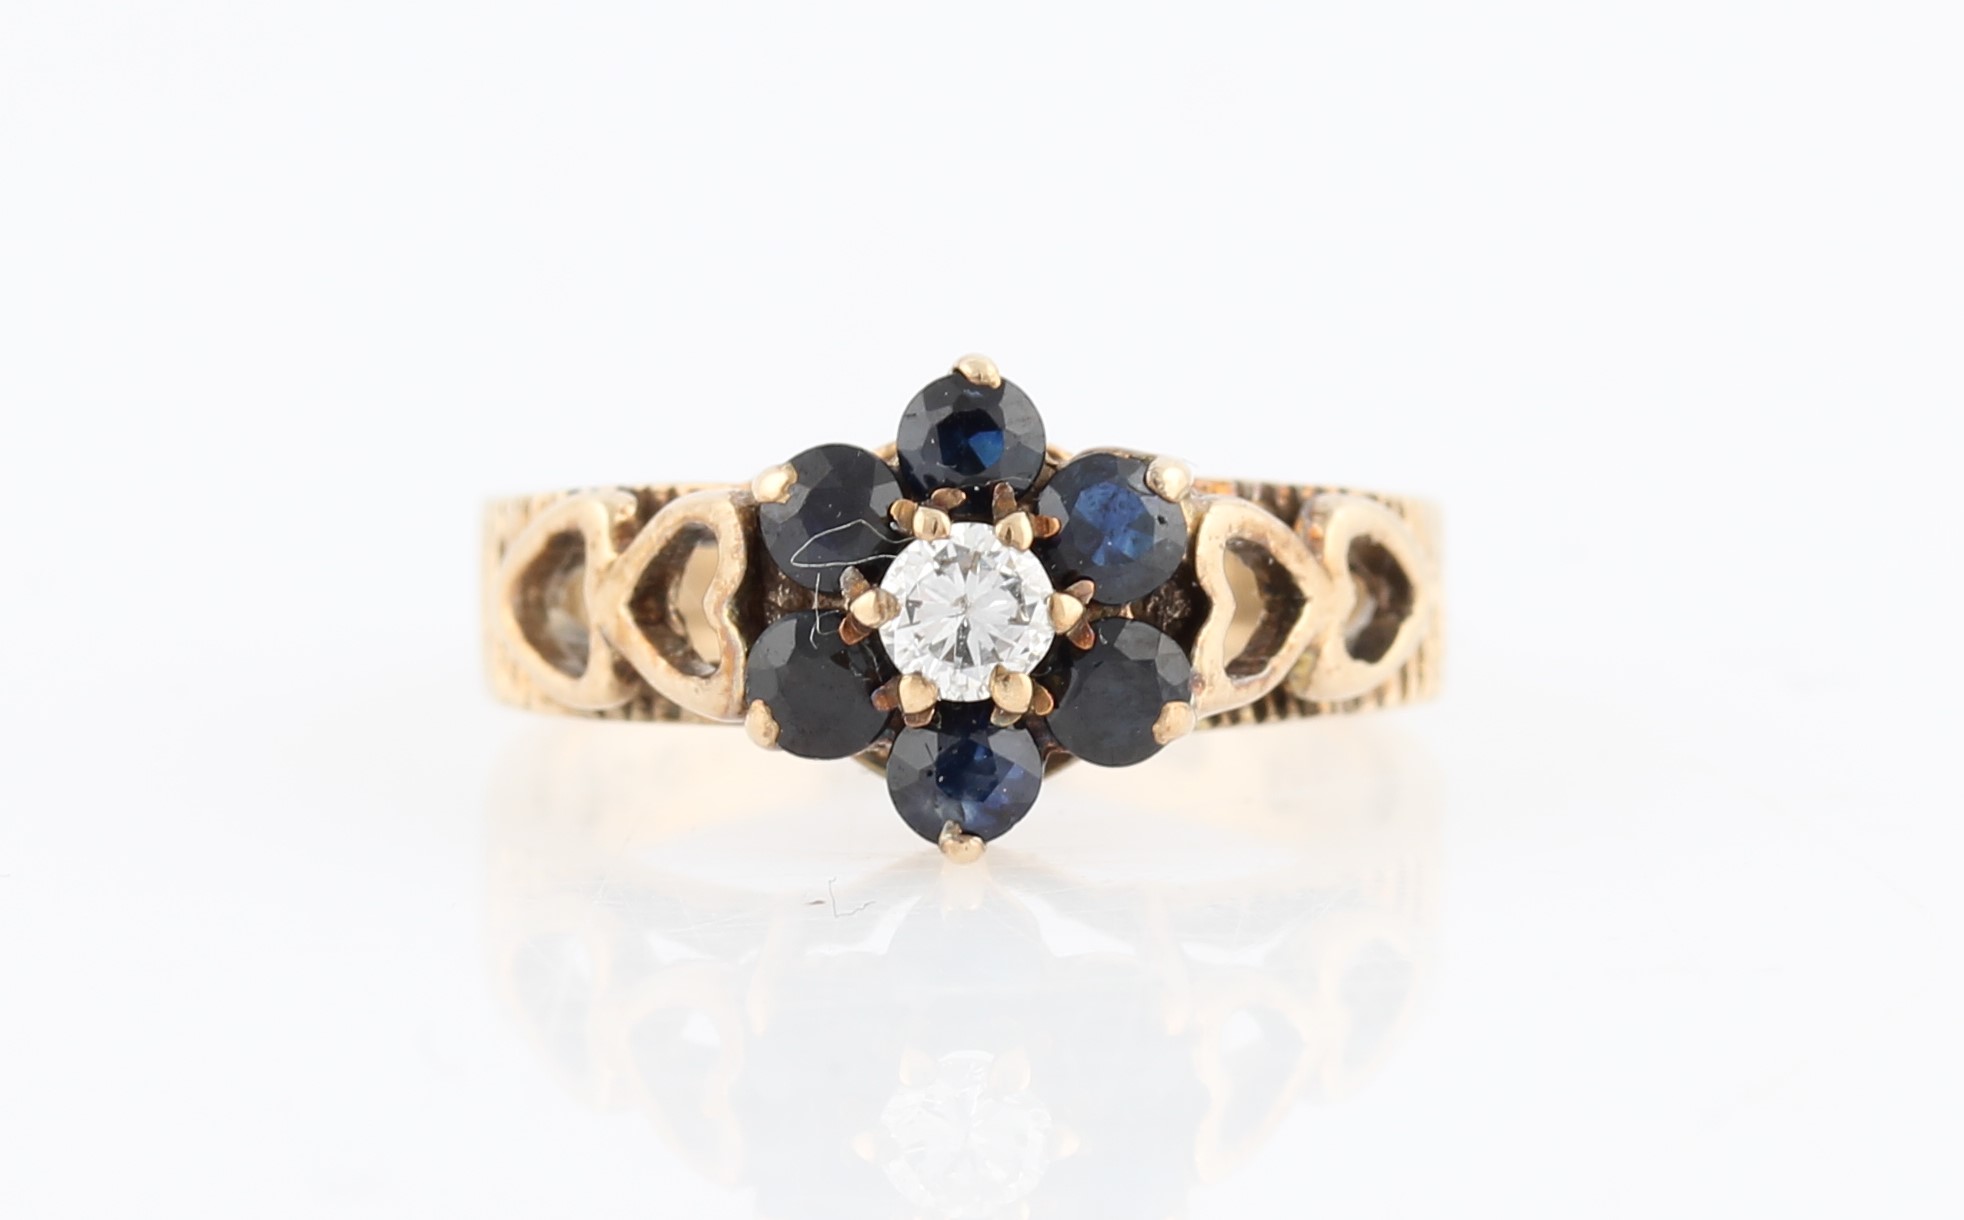 A diamond and sapphire flower cluster ring, set with a central round brilliant cut diamond